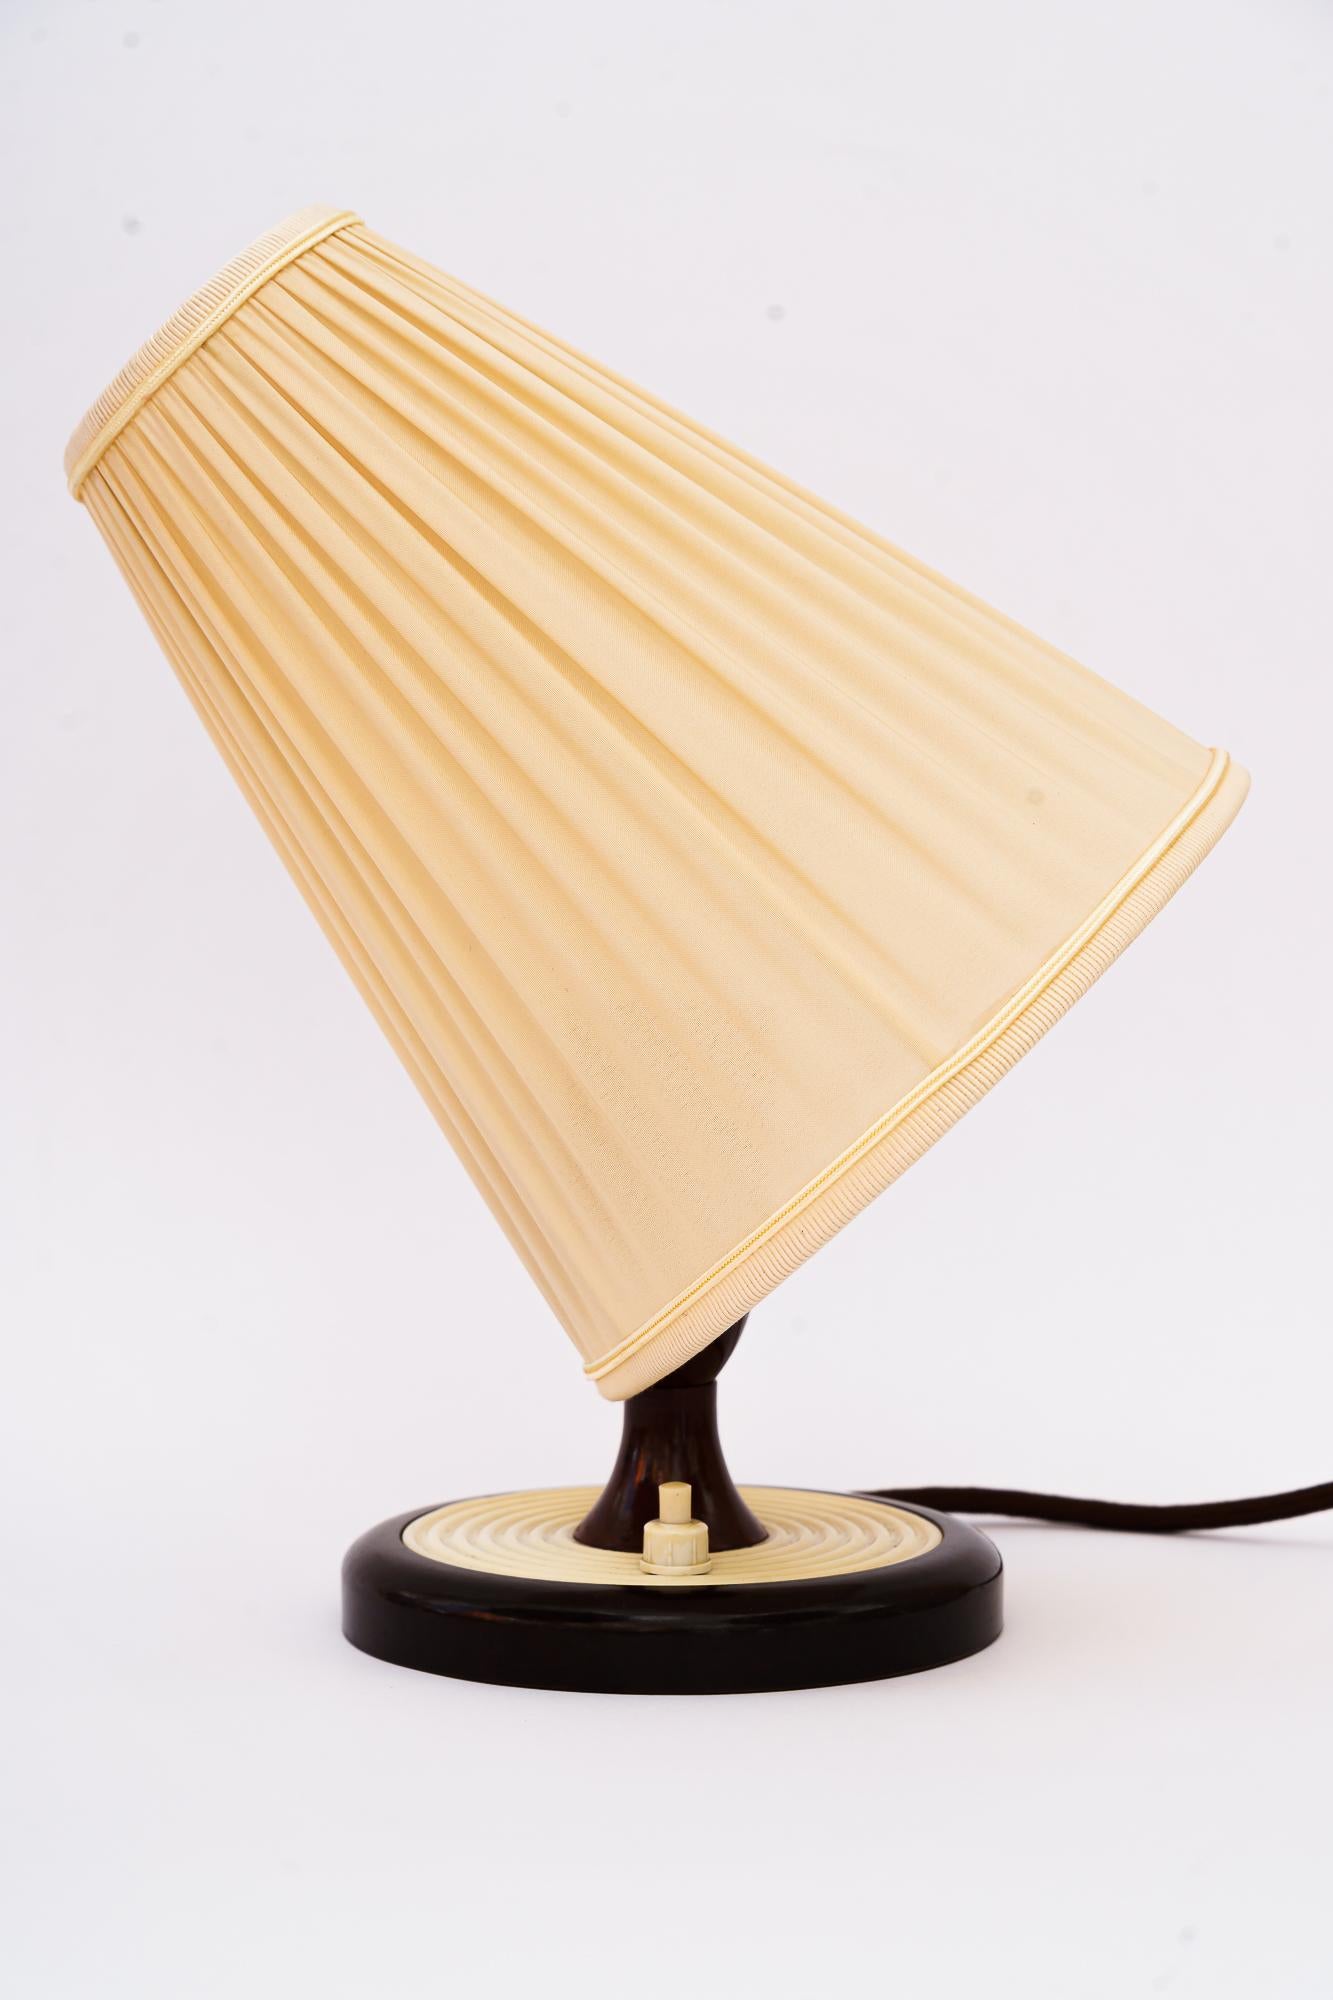 Bakelite table lamp Vienna with Fabric Shade Around 1960s.
Original condition.
the fabric shade is replaced ( new ).